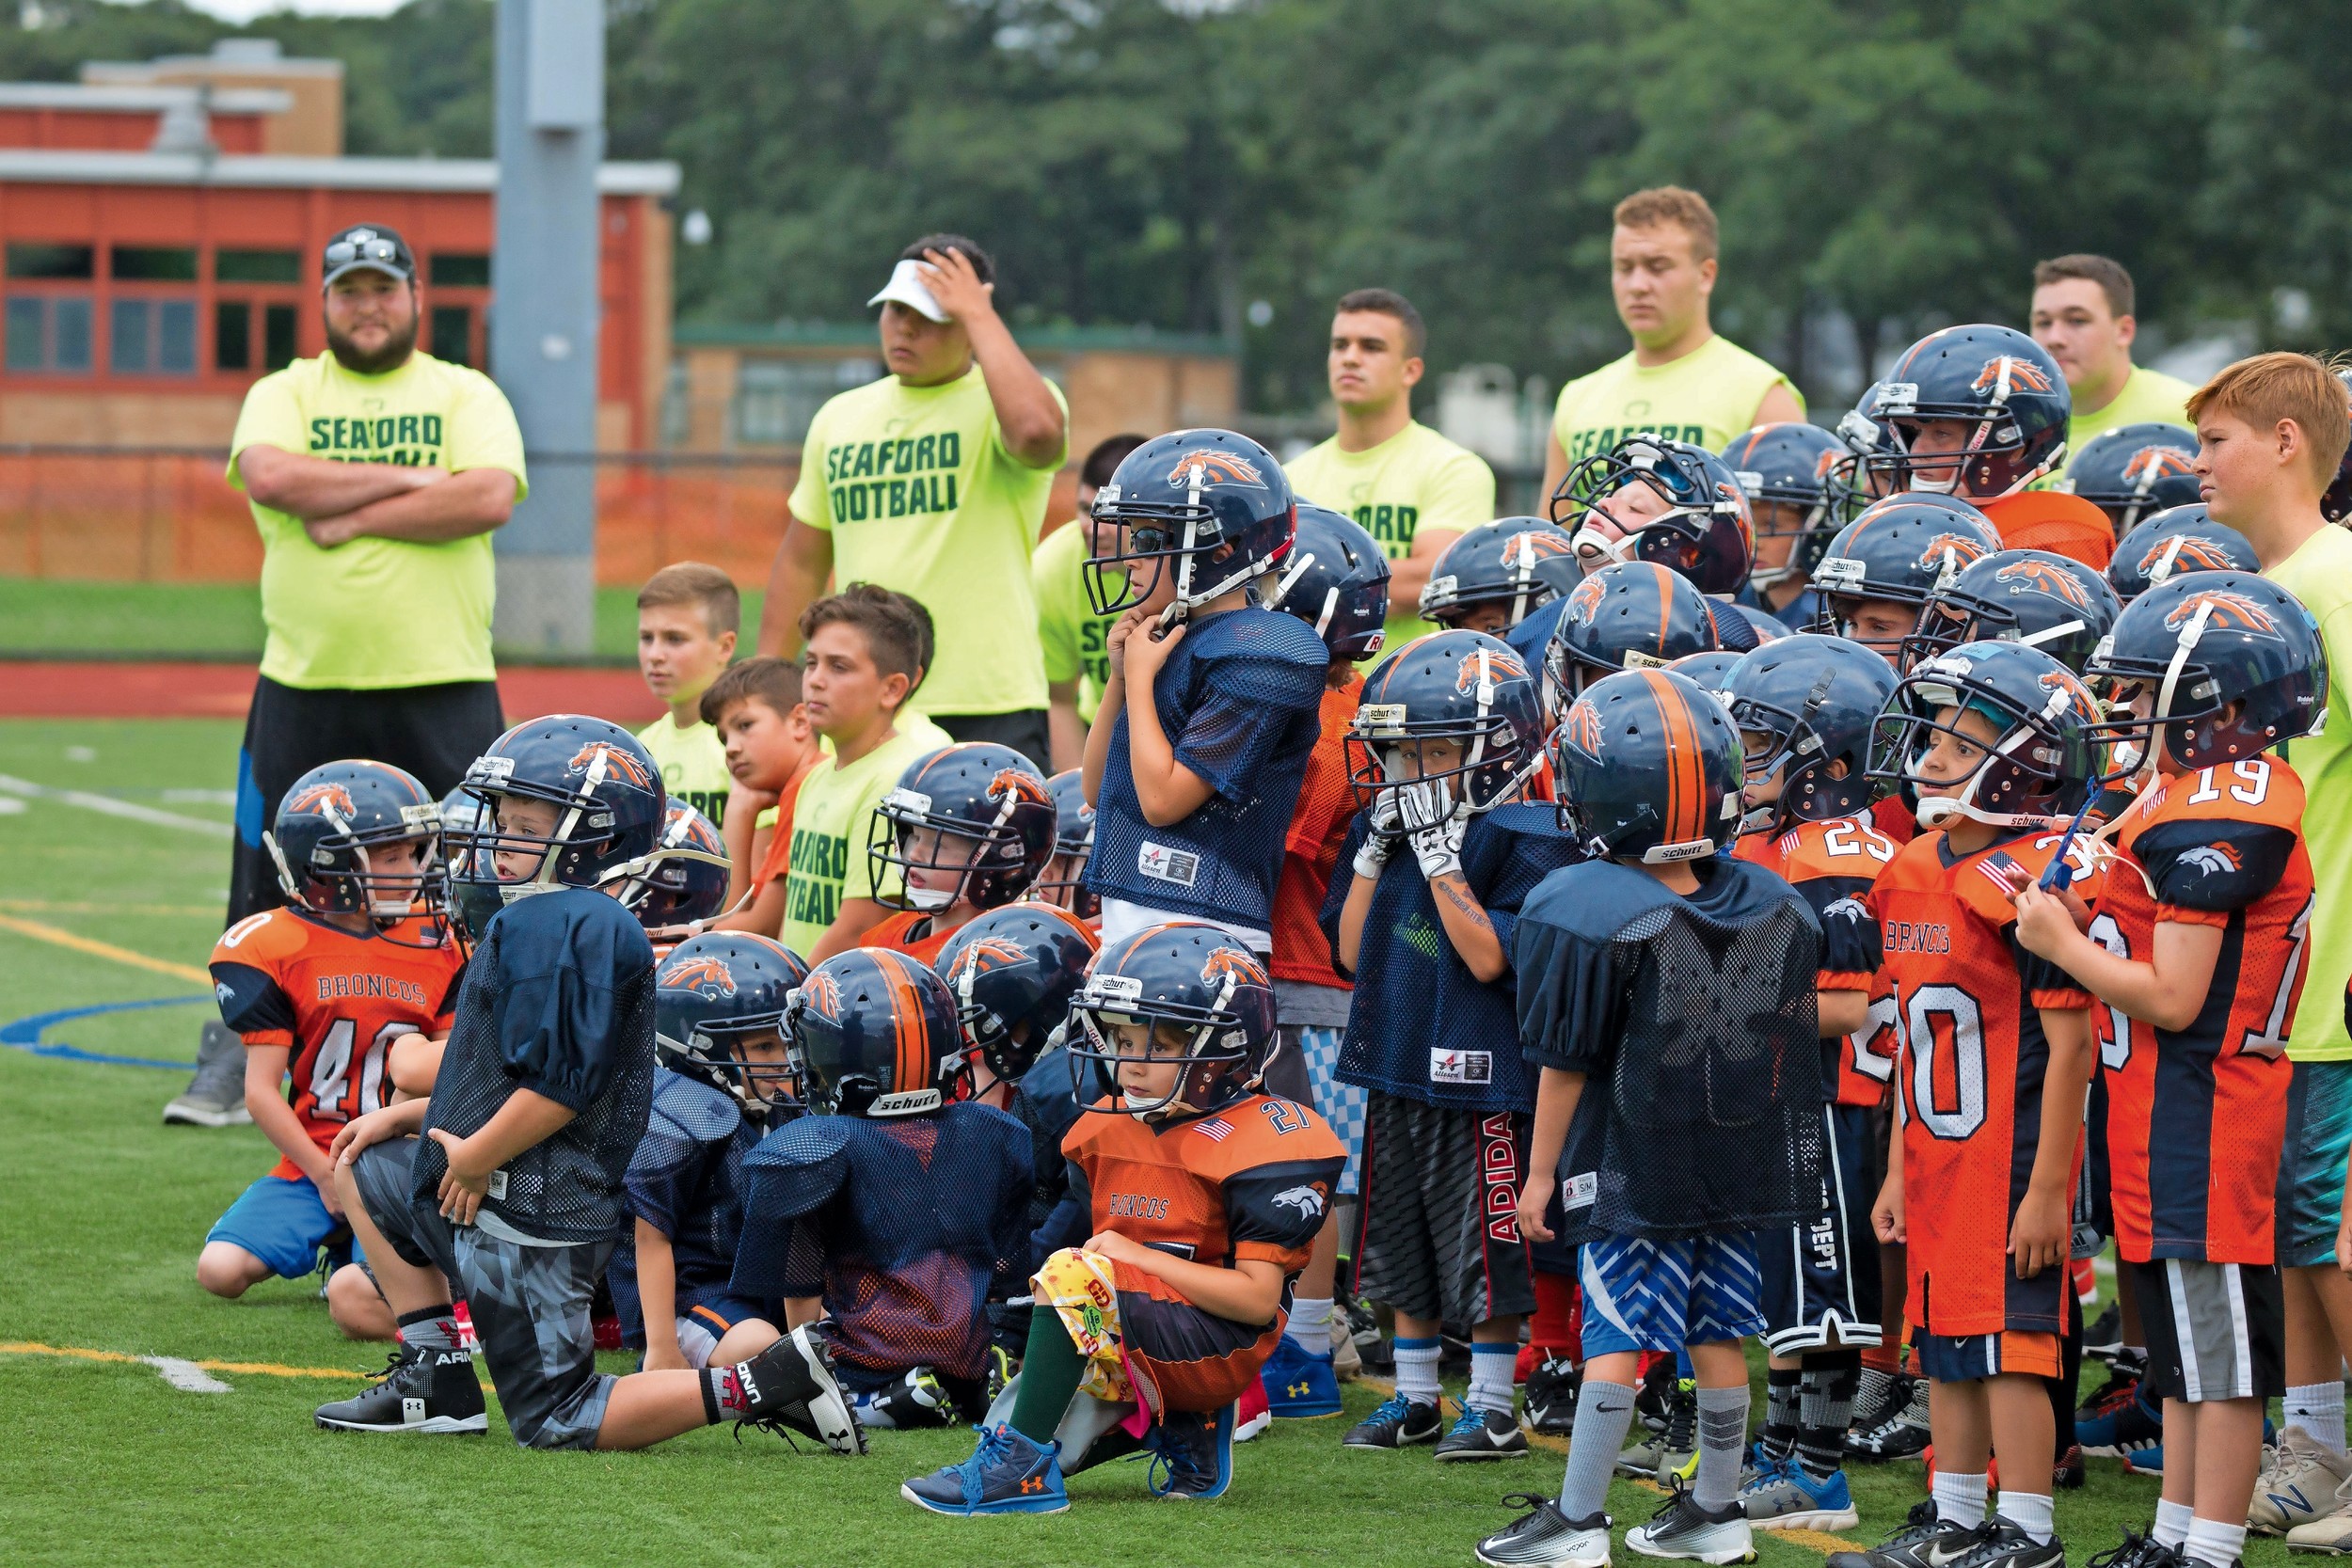 Seaford High School coaches and players taught youth players from the Long Island Broncos about football and community pride at the Never Quit Football Clinic on July 25.